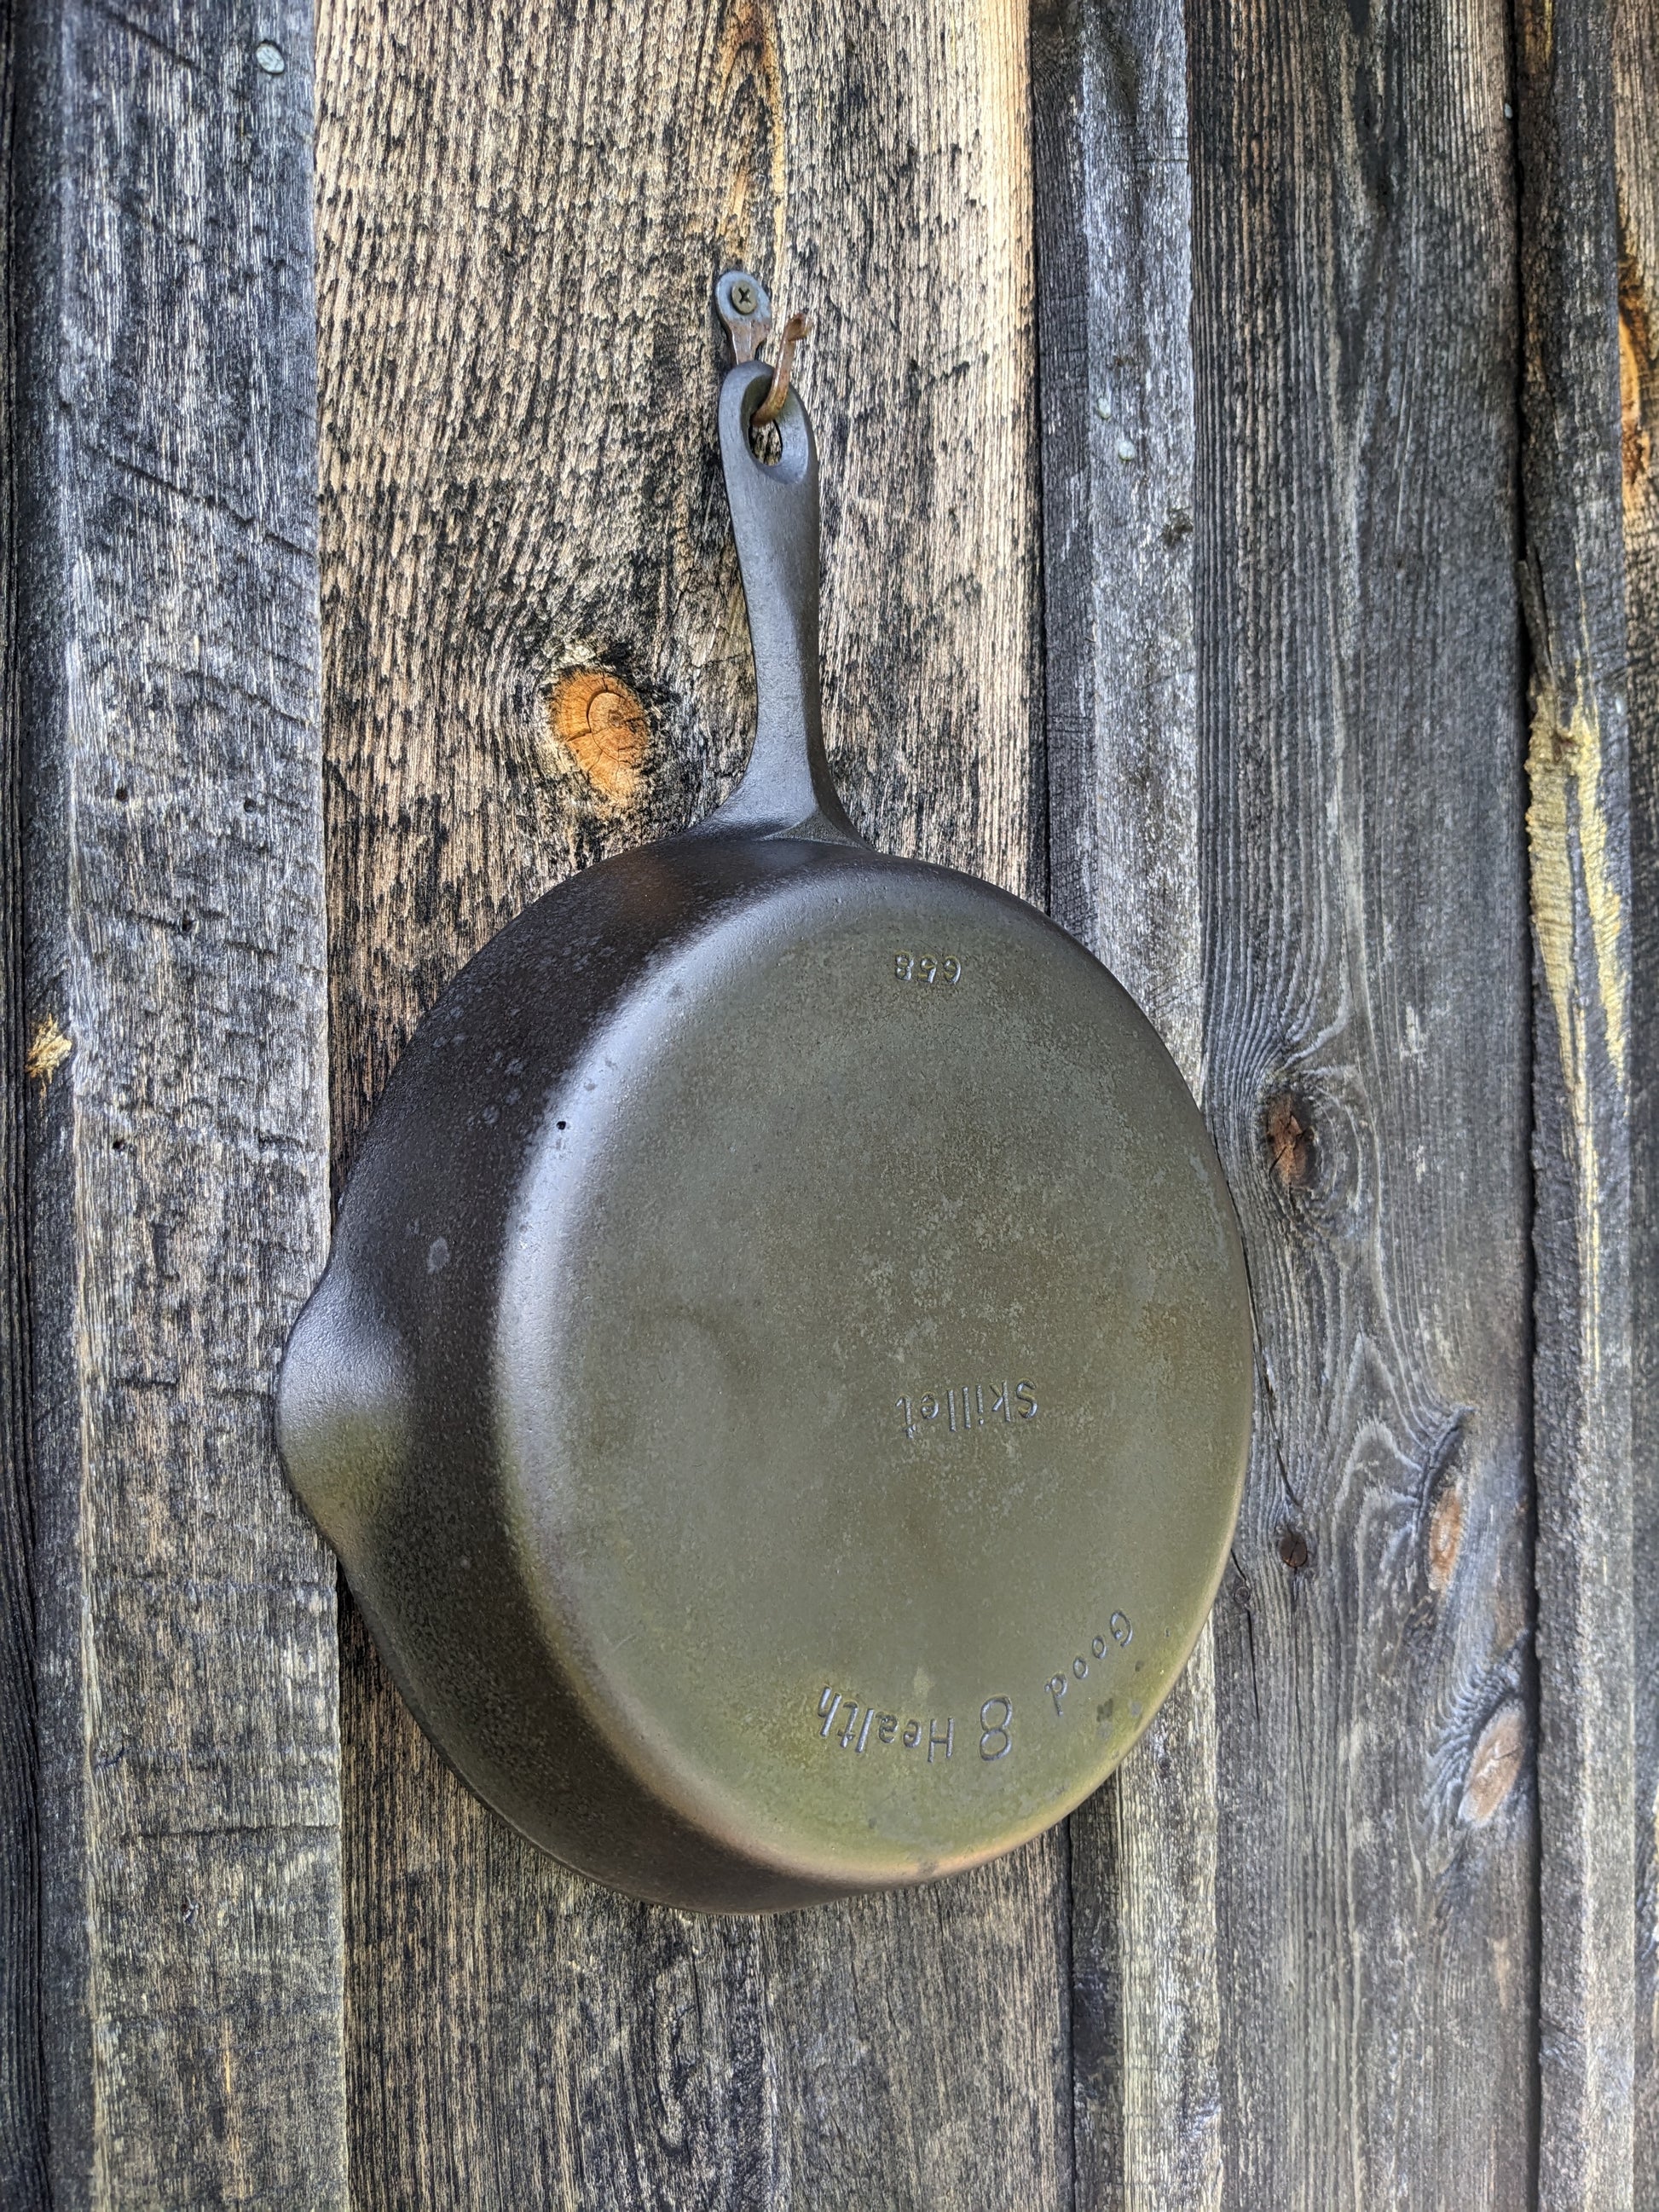 Fully Restored GRISWOLD Cast Iron SKILLET Frying Pan 8" SMALL